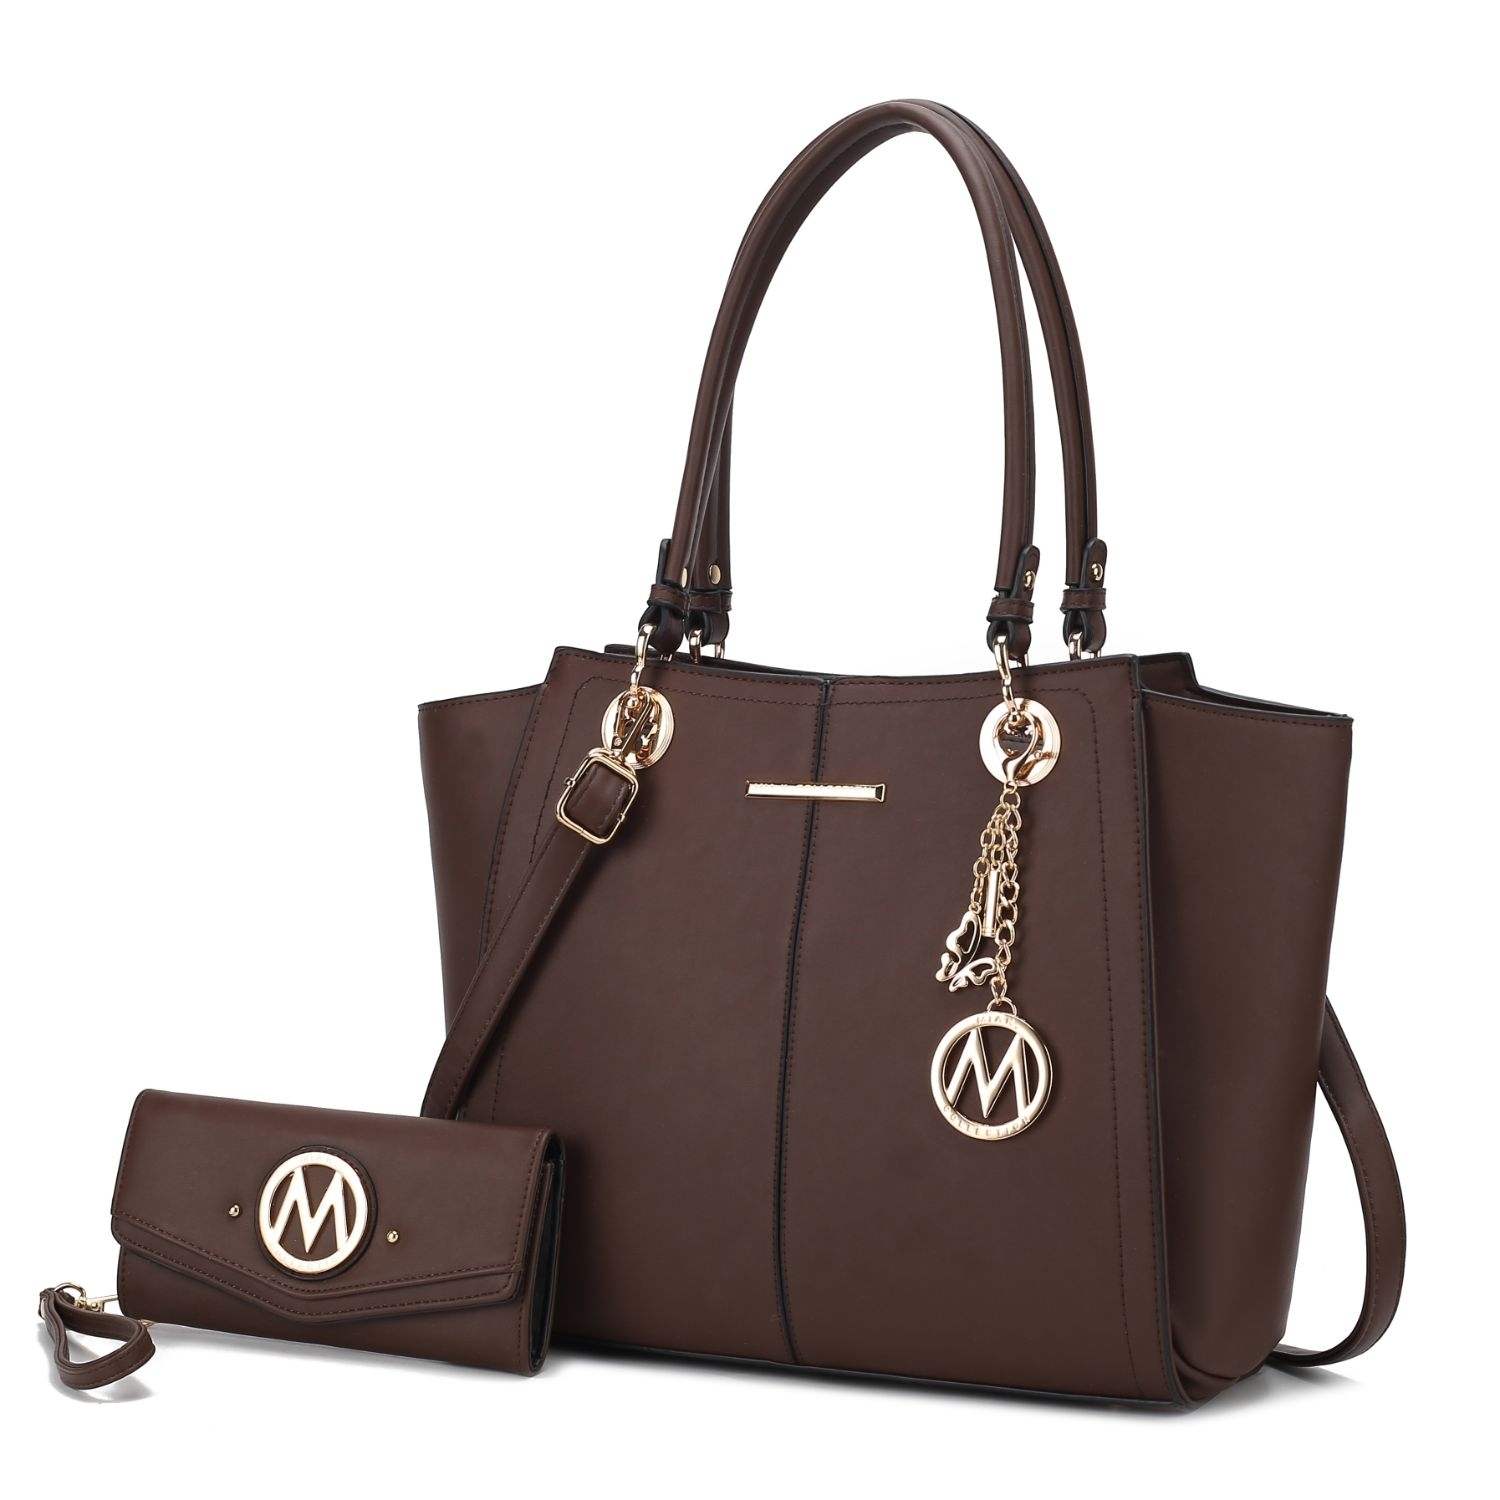 MKF Collection Ivy Vegan Leather Women's Tote Handbag By Mia K With Wallet -2 Pieces - Chocolate